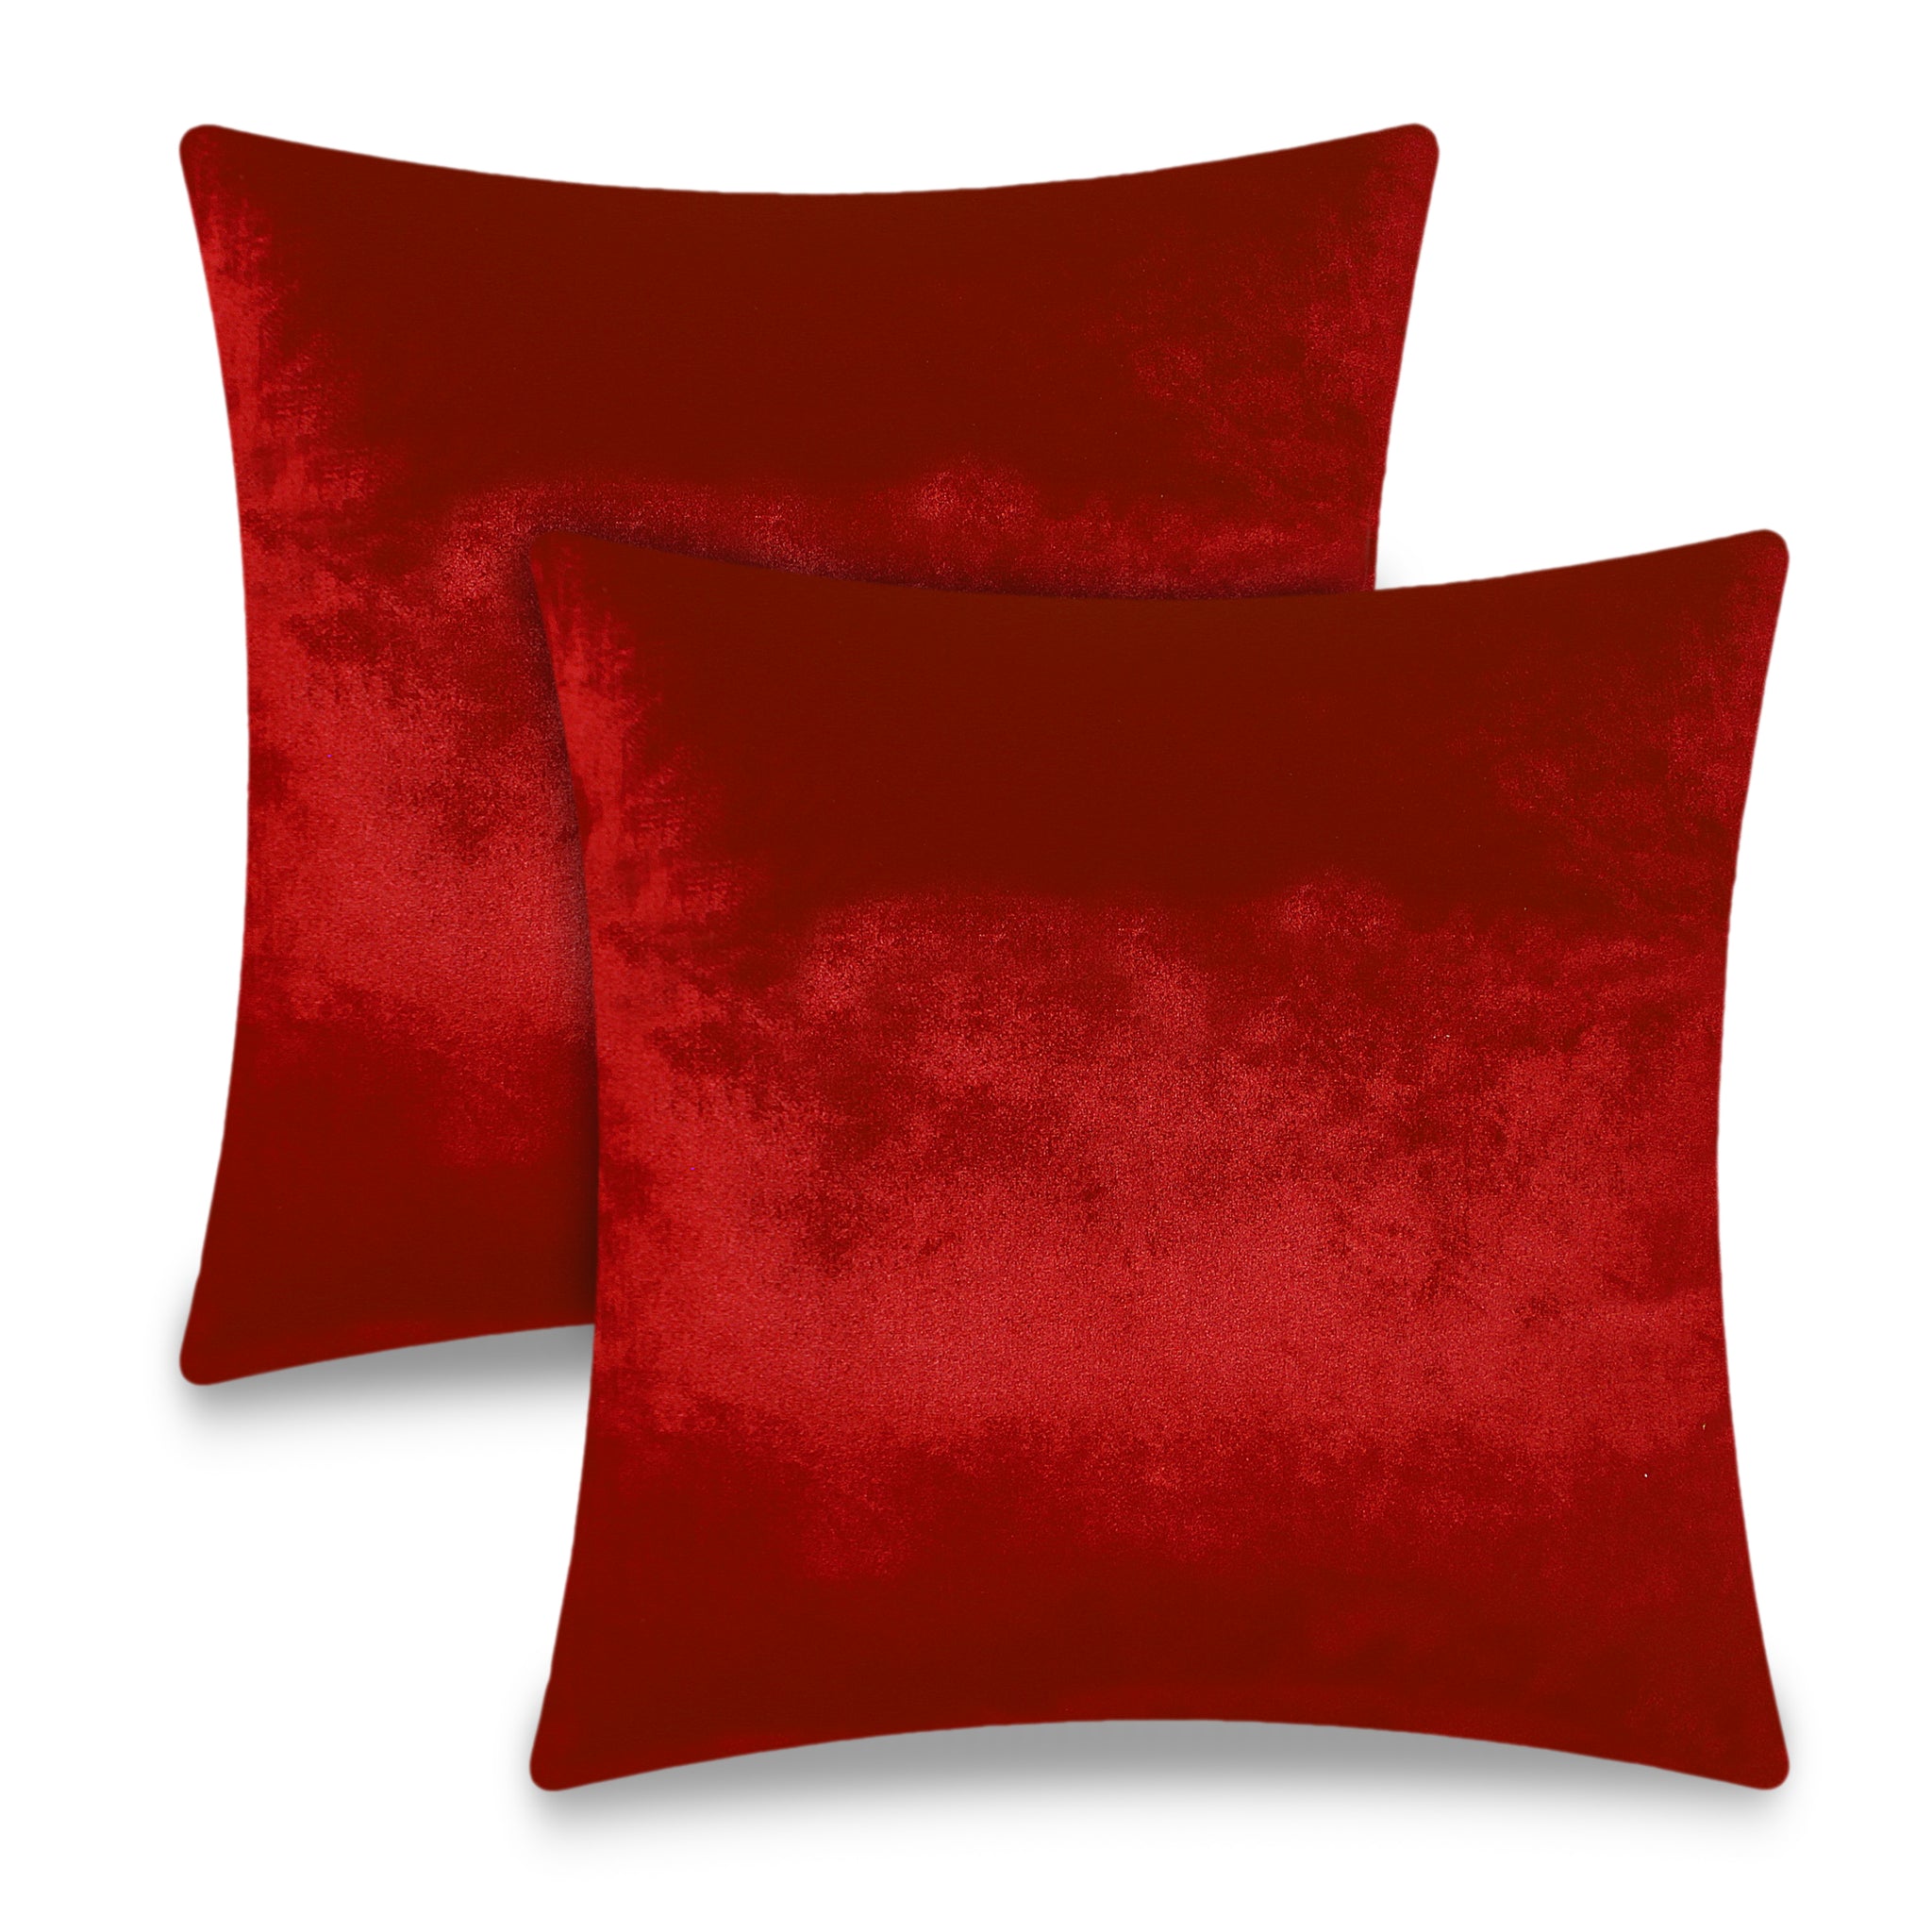 Set of 2 Velvet Throw Pillow Covers Solid Color Decorative Pillow Covers Home Decor Cushion Cover for Sofa Couch Chair Bed 45x45 cm 18x18 In